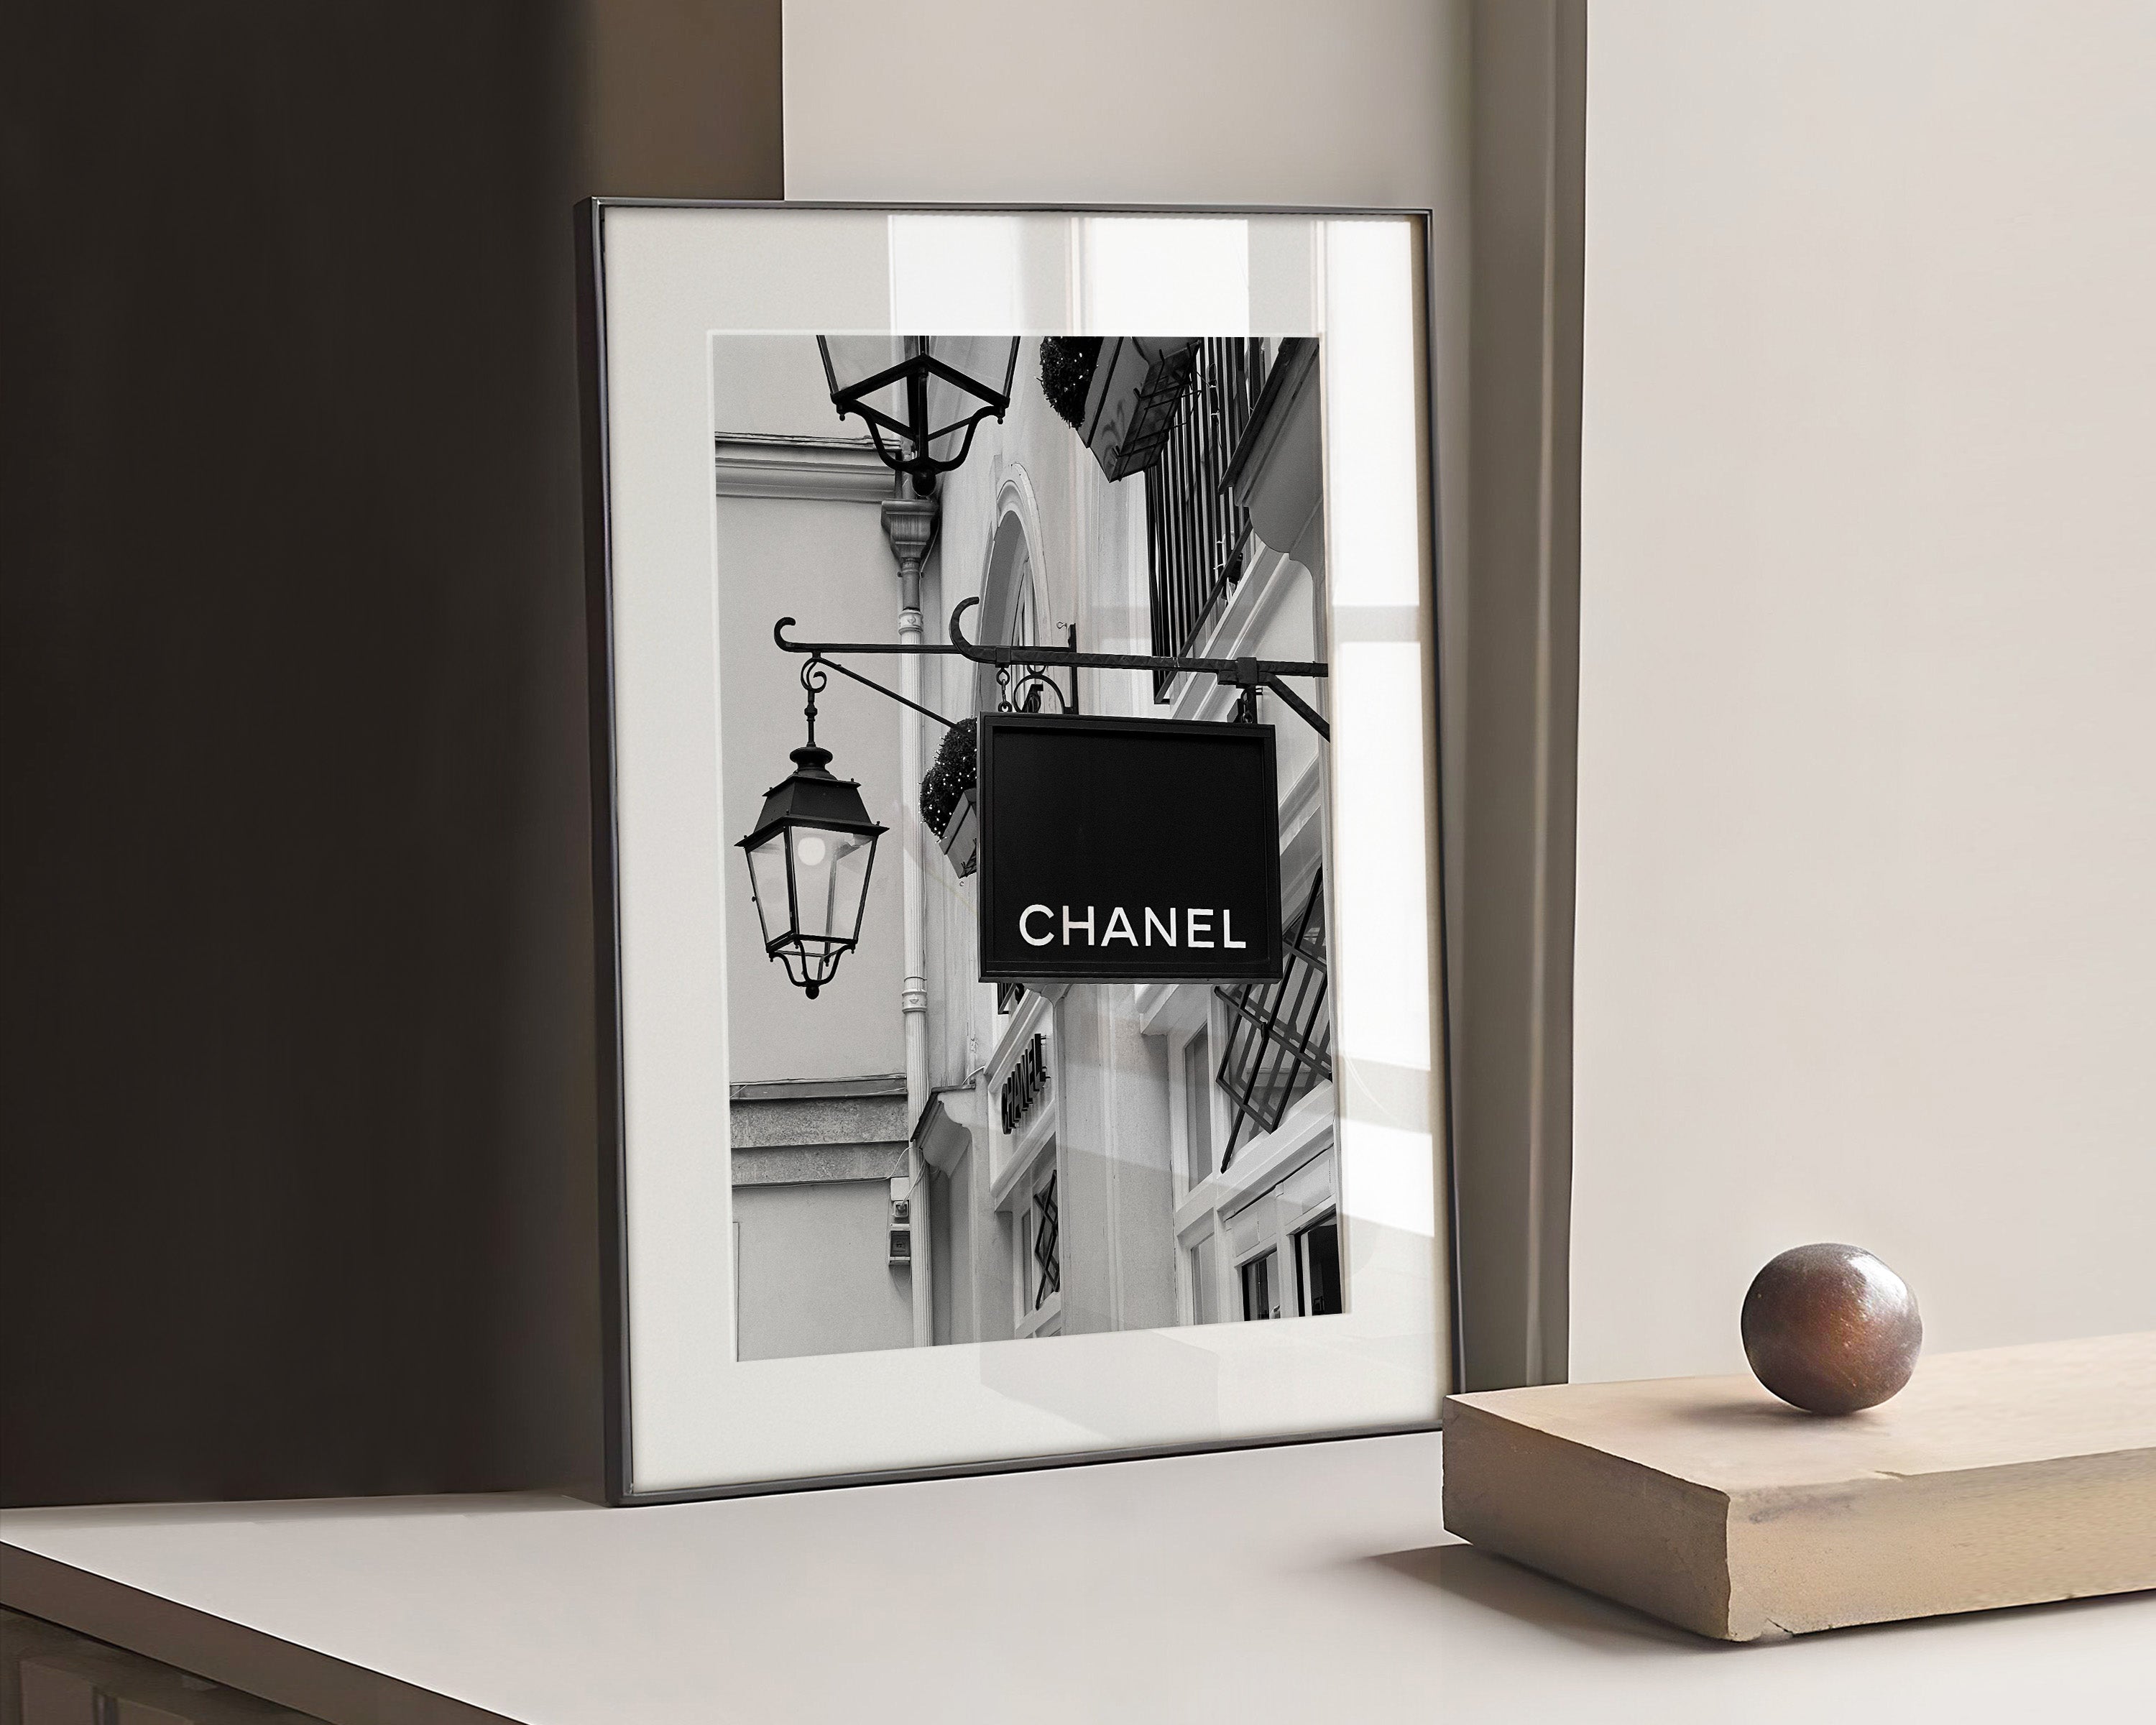 Photography print of an iconic fashion Chanel store.